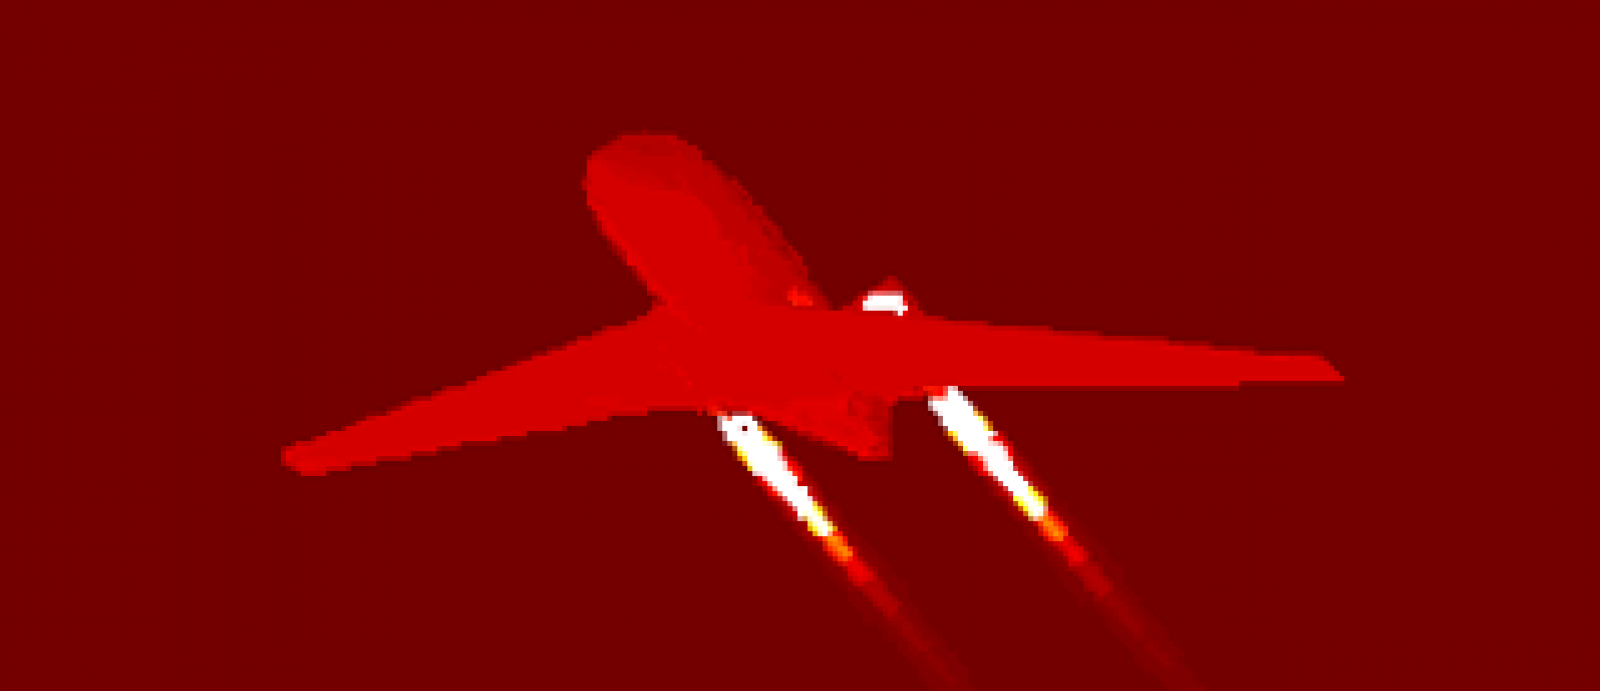 Modeled infrared signature of an aircraft.